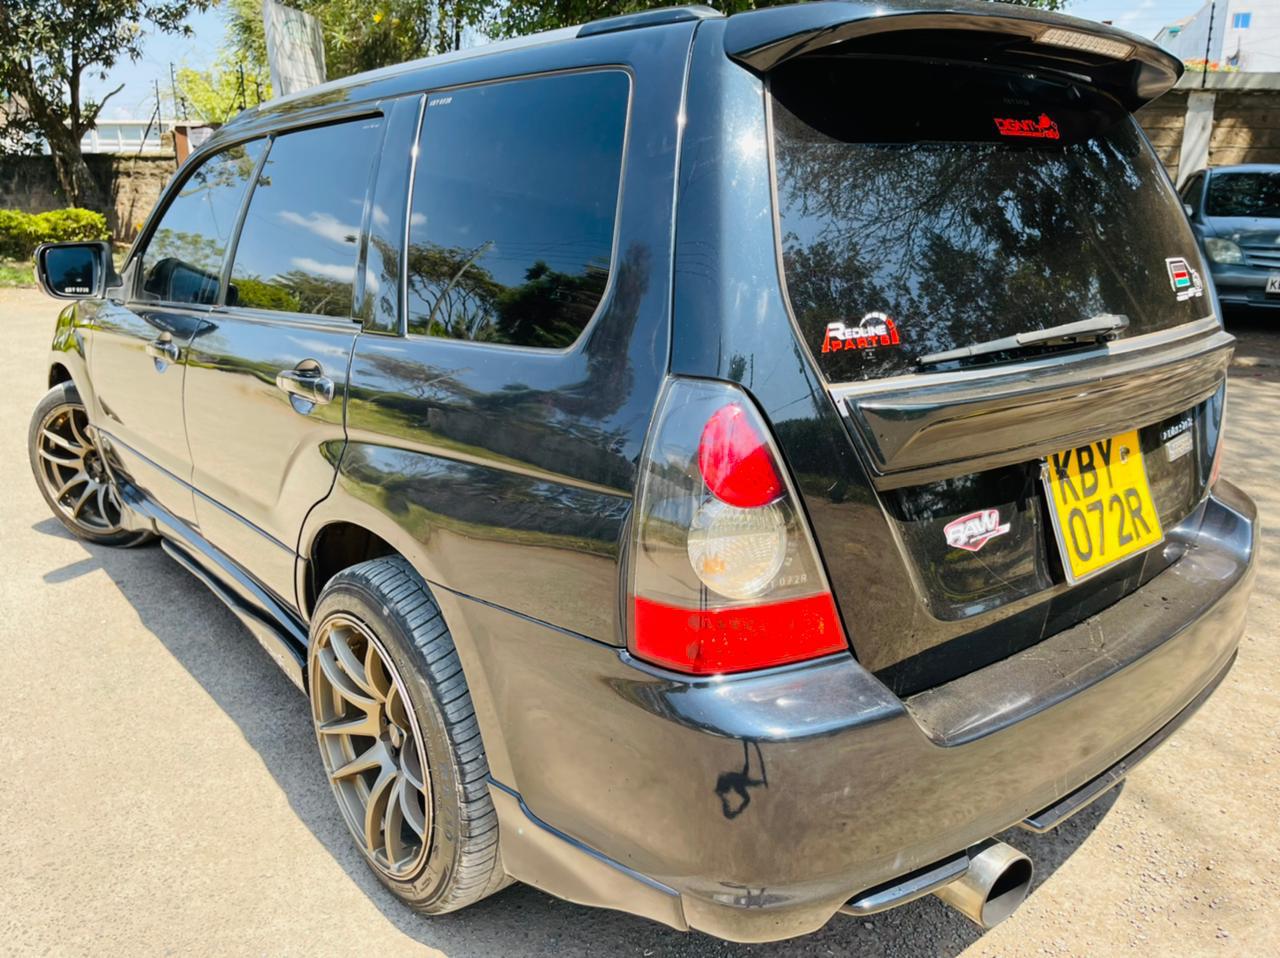 Subaru Forester TurboCharged STI SPEC 2007 Pay 20%, 80% in 60 MONTHLY INSTALLMENTS as New